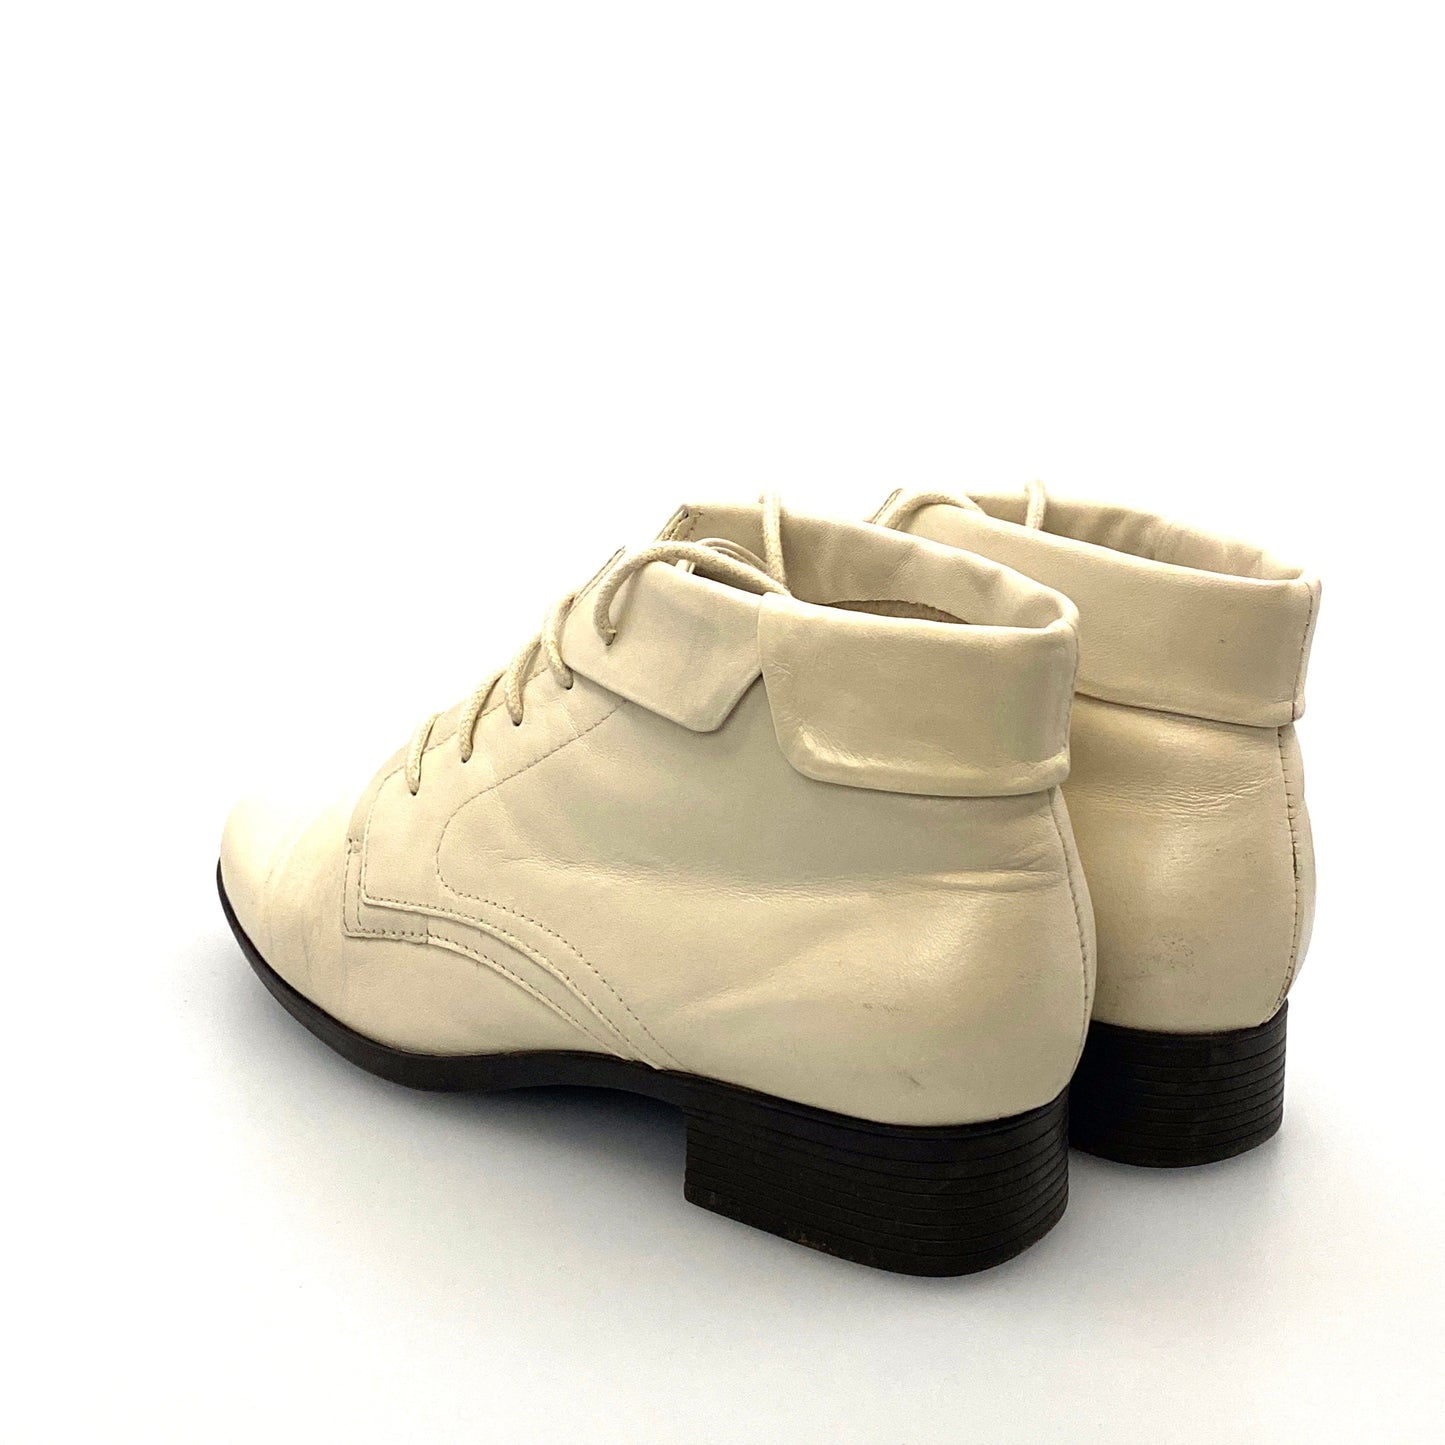 St. John’s Bay Boots Womens Size 6M Winter White Leather Lace Up Ankle Booties Shoes